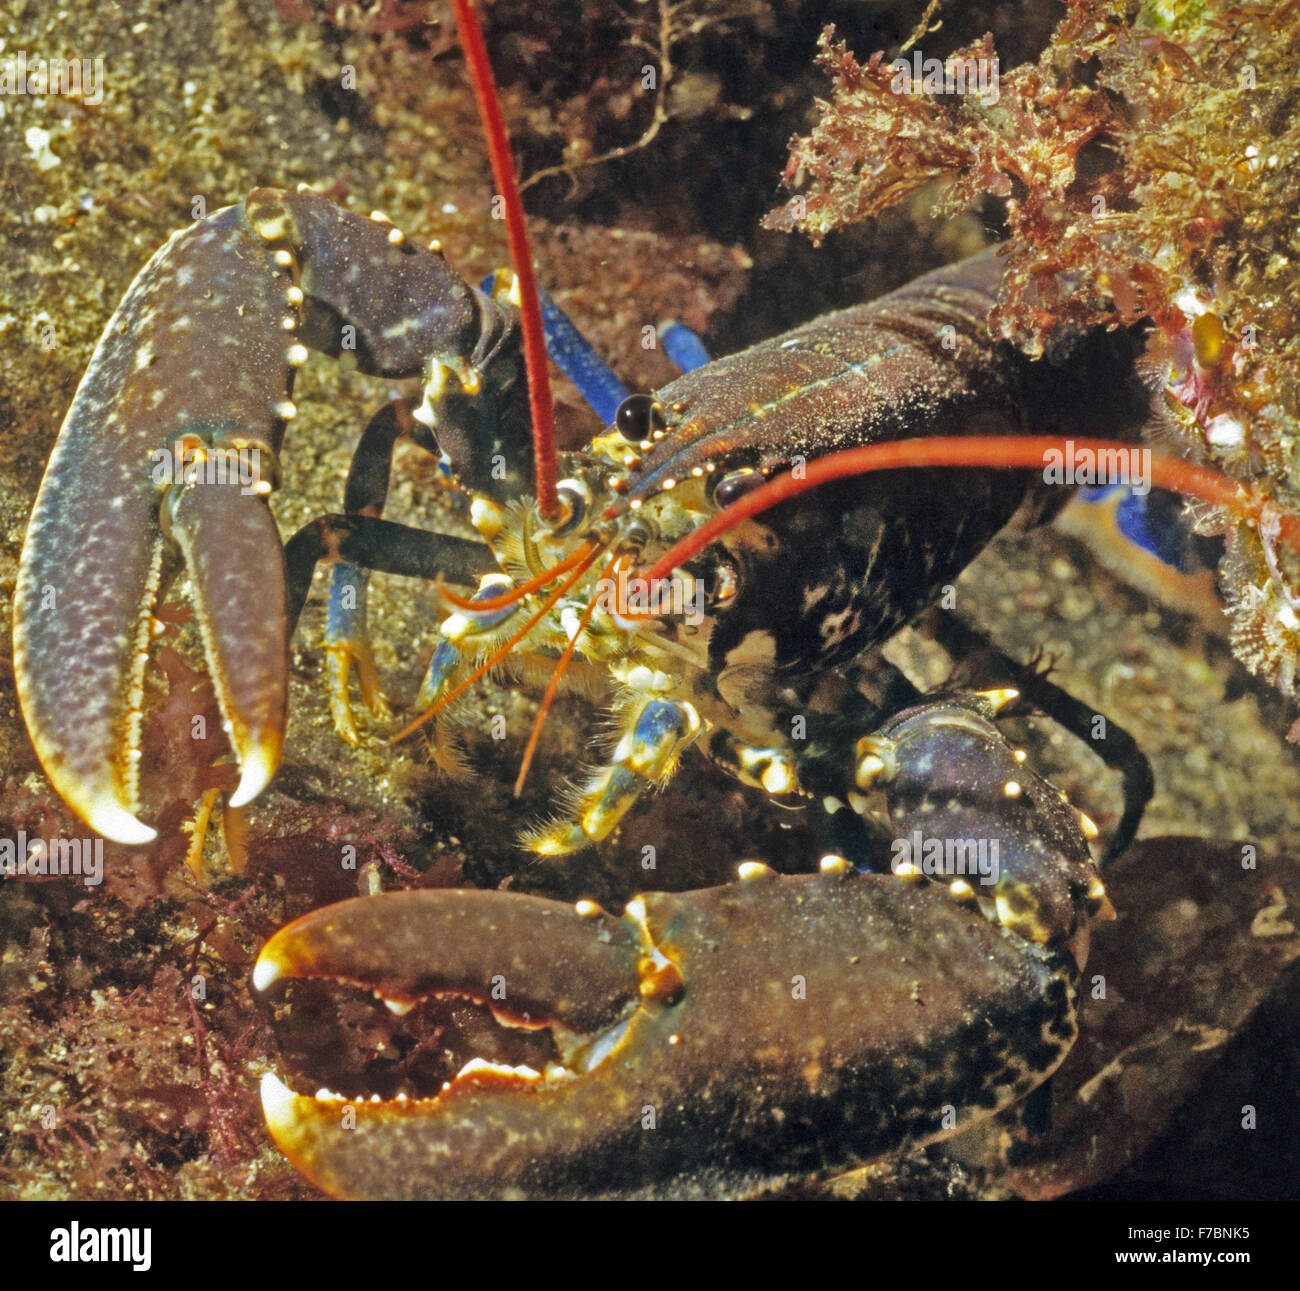 Left handed common lobster. Amazing underwater marine life off the coast at St Abbs Scotland. Stock Photo